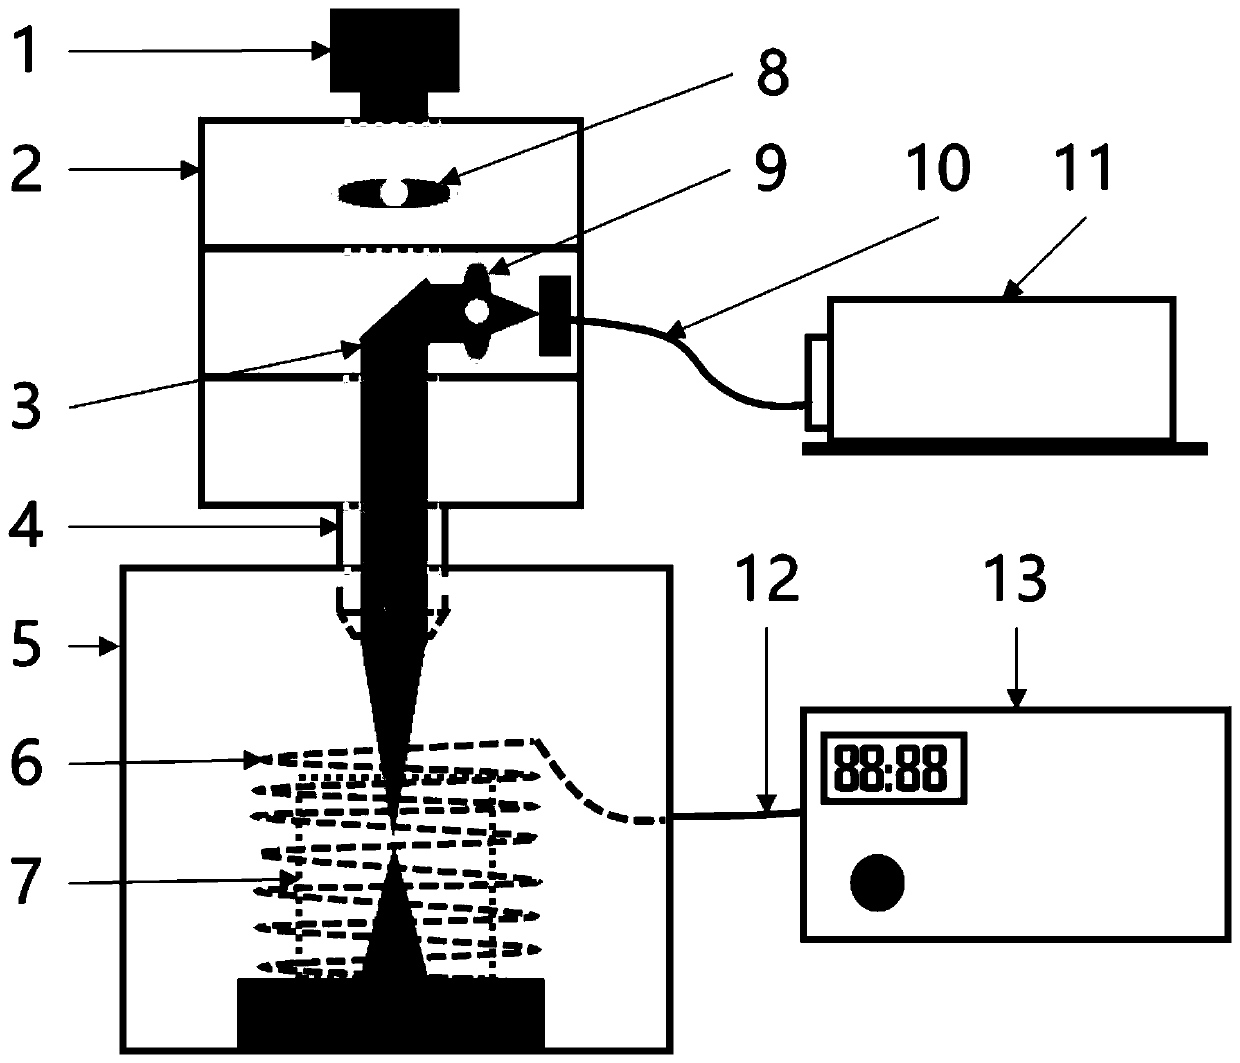 Single bioaerosol particle identification system based on laser capture and microwave radiation